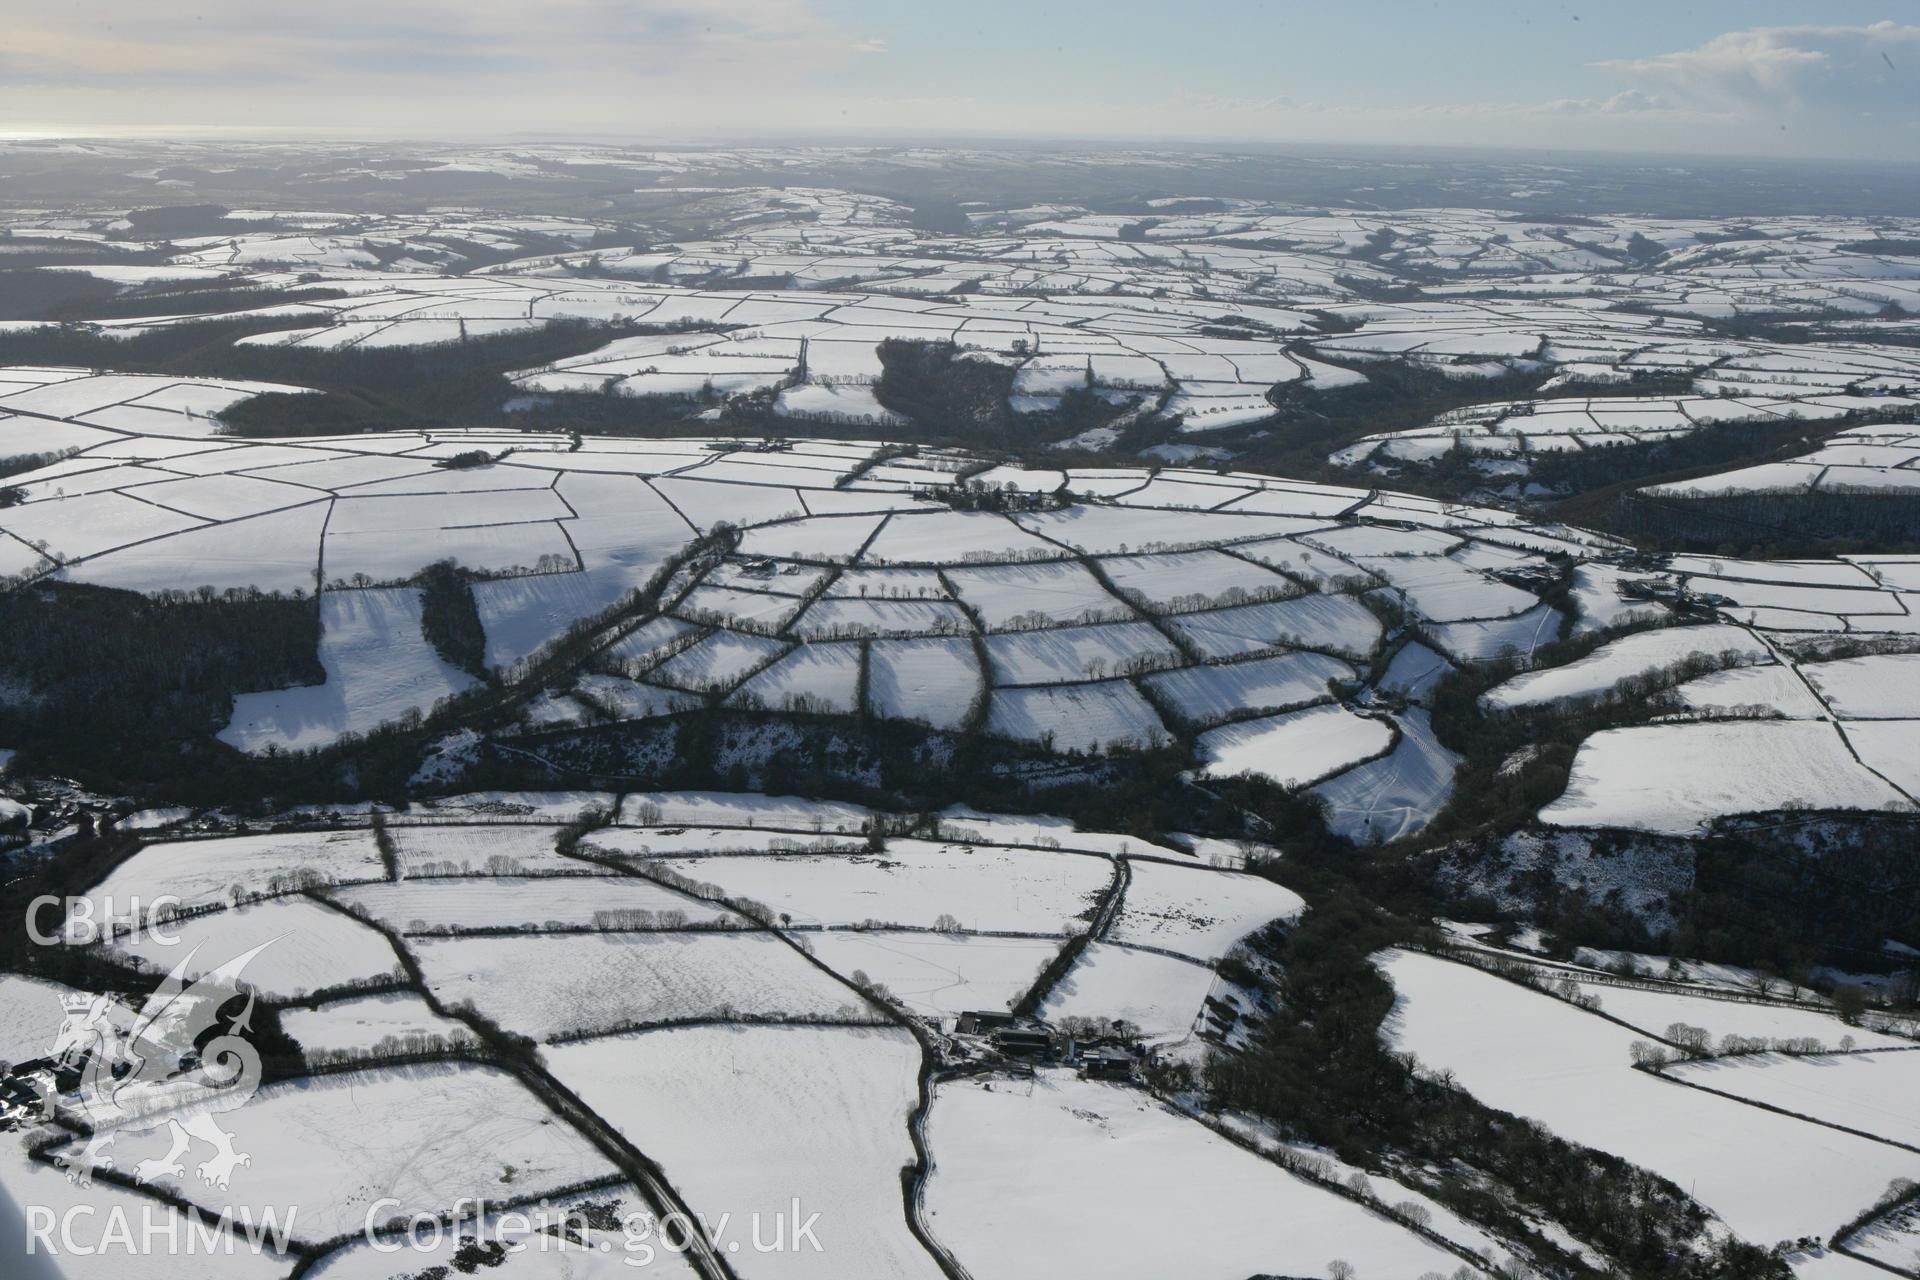 RCAHMW colour oblique photograph of Winter landscape with Llanwinio's parish church in the distance. Taken by Toby Driver on 06/02/2009.